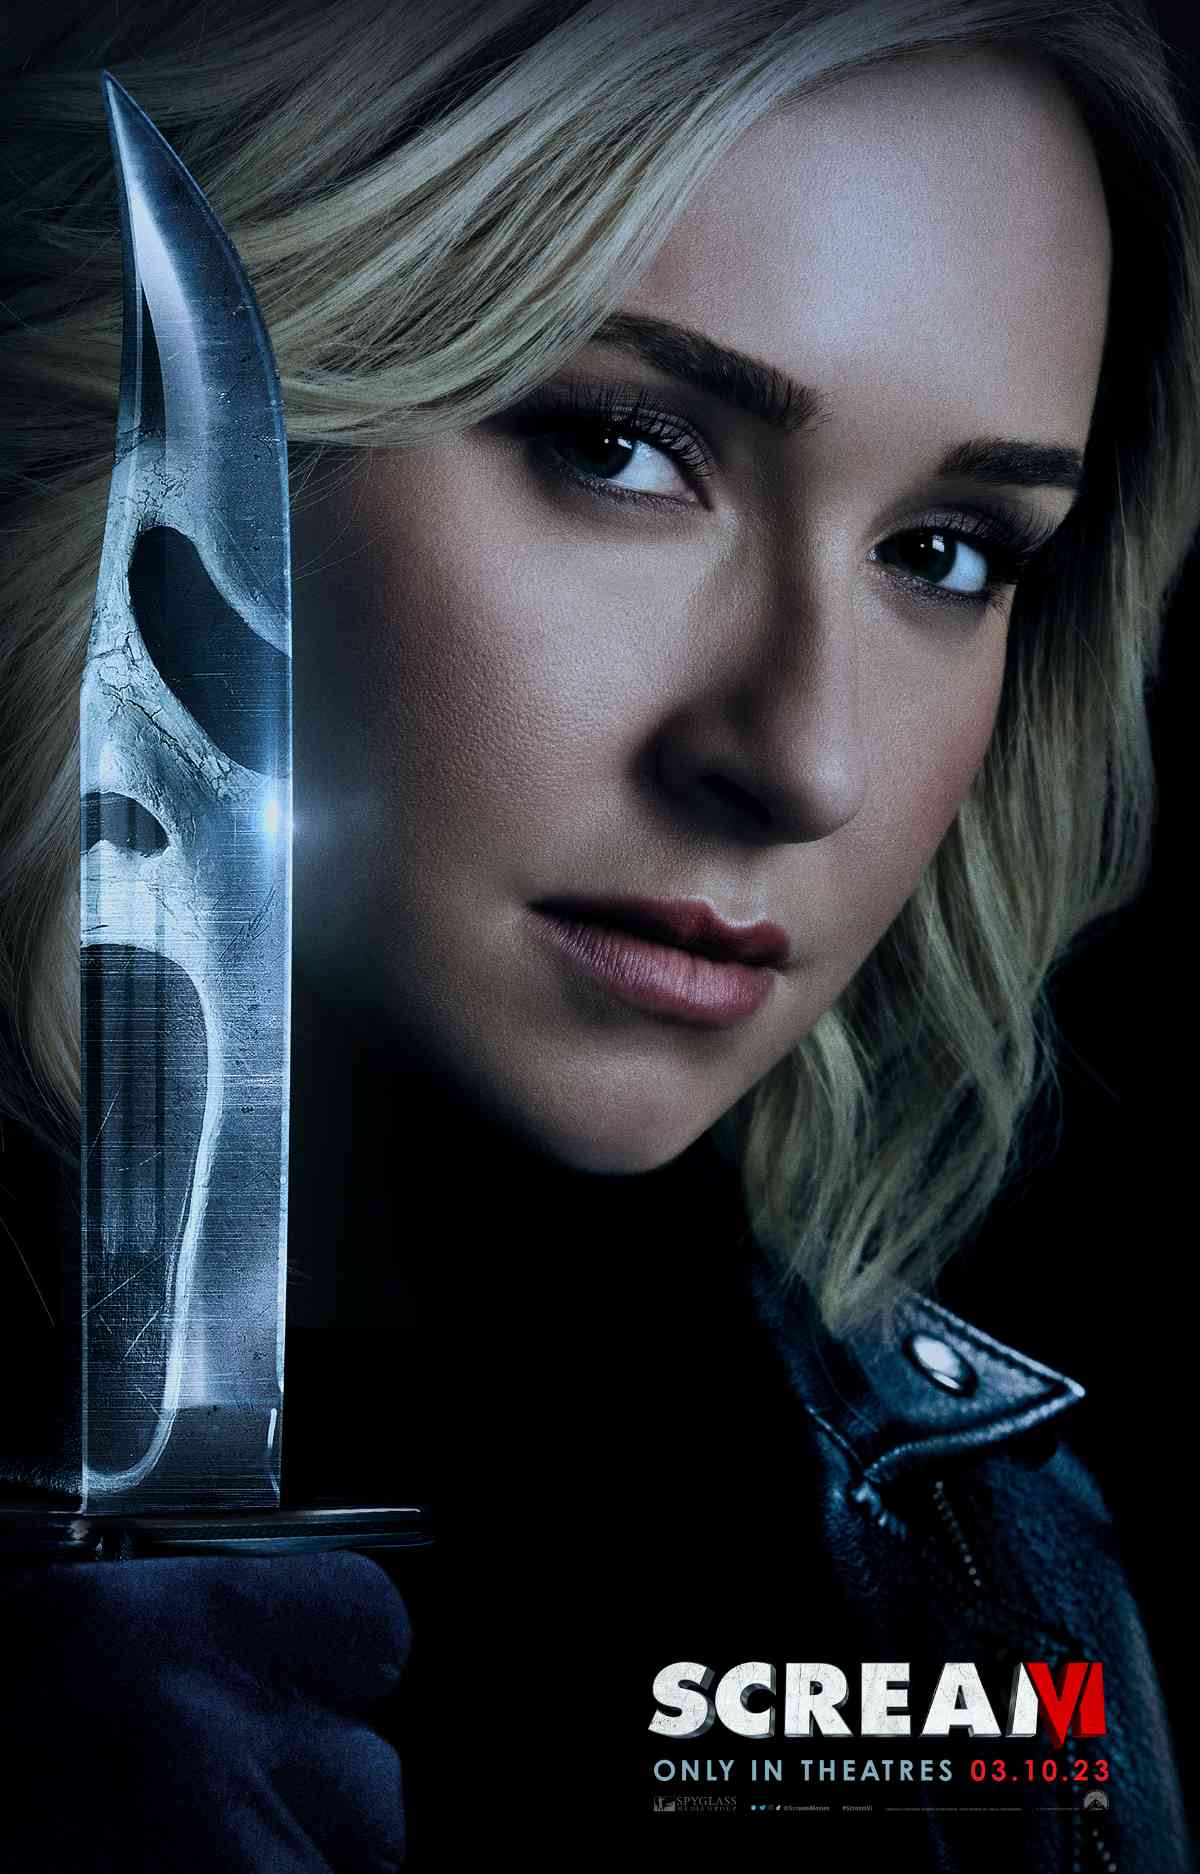 Scream 6 Movie Posters Introduce Characters